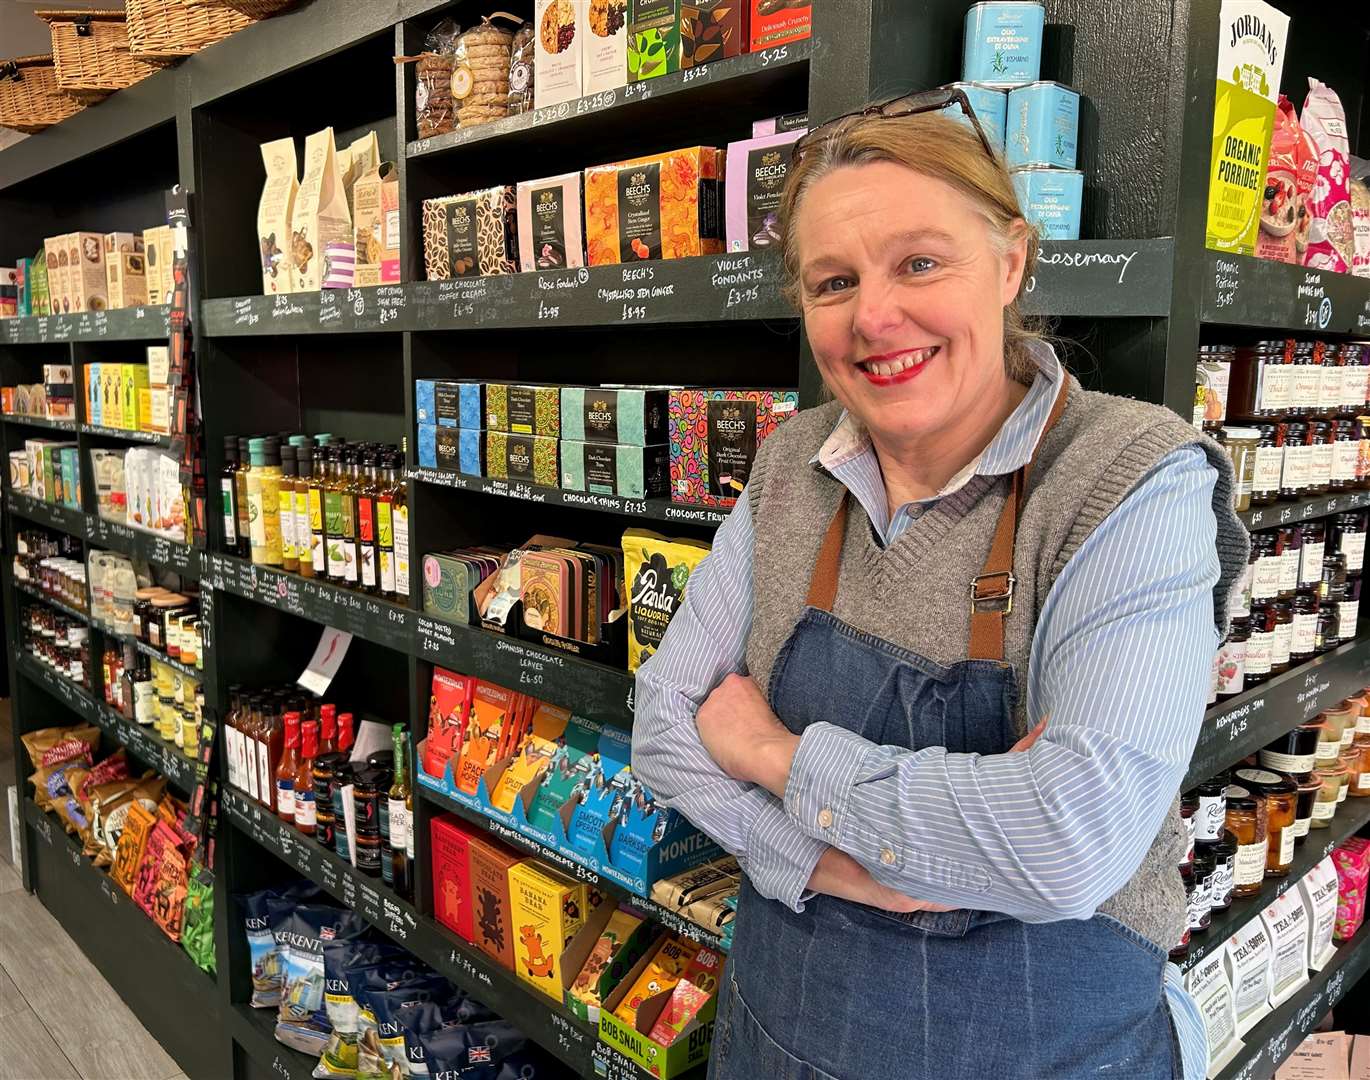 East Street Deli owner Nicky Reader hopes to sell English wines, locally produced spirits and beer - as well as Italian and Spanish wines to match its other continental products